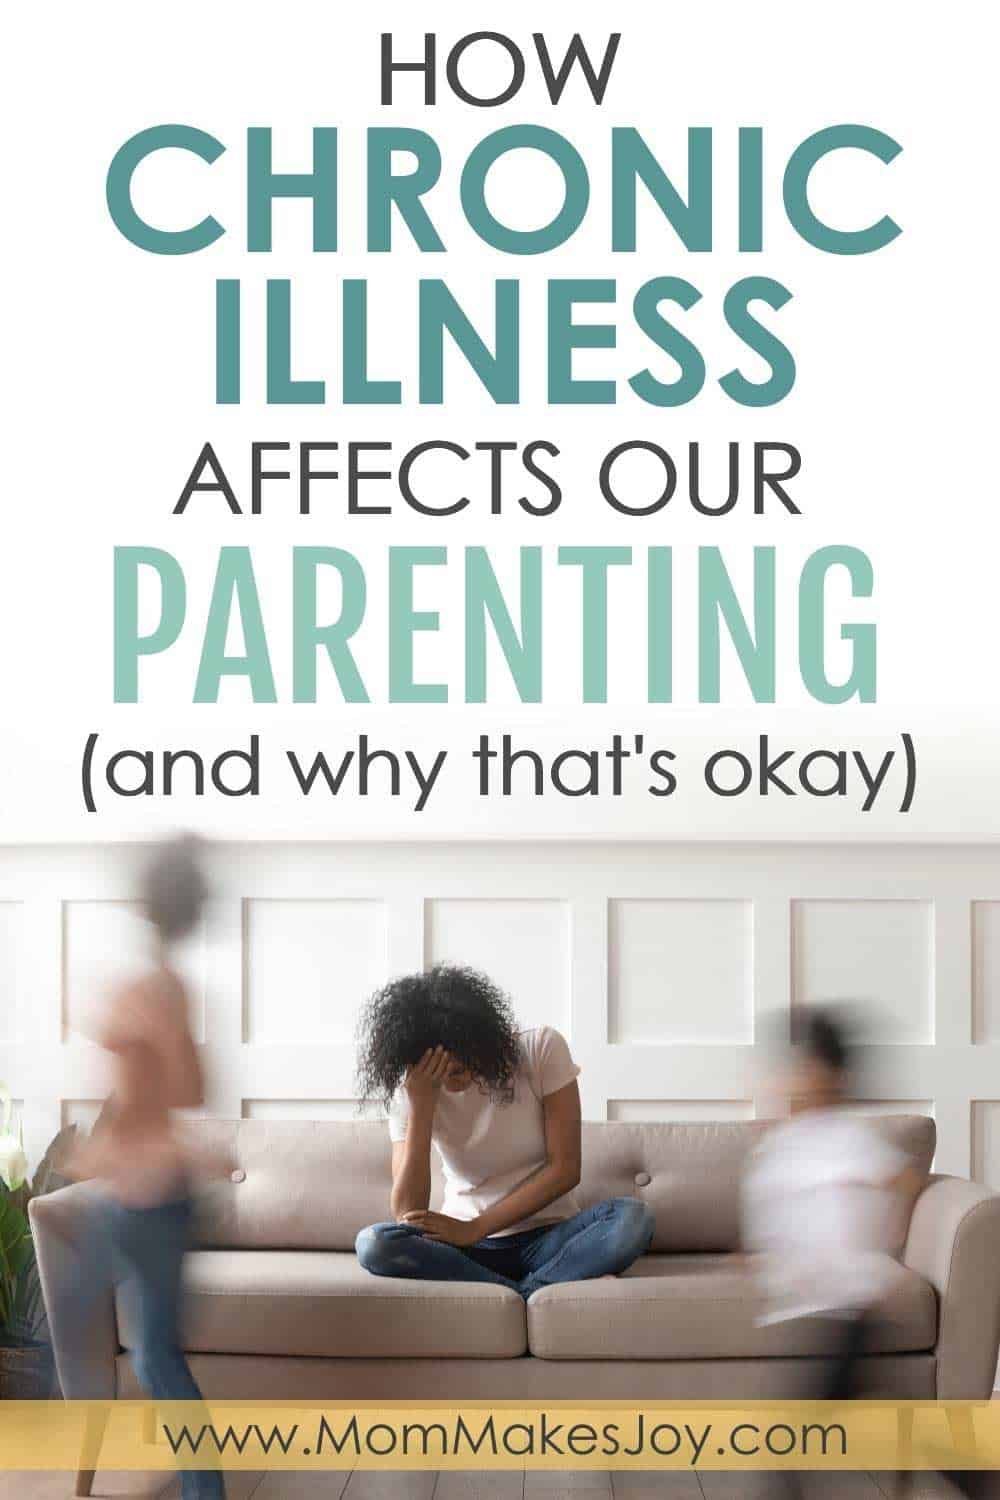 How chronic illness affects our parenting - and why that's okay